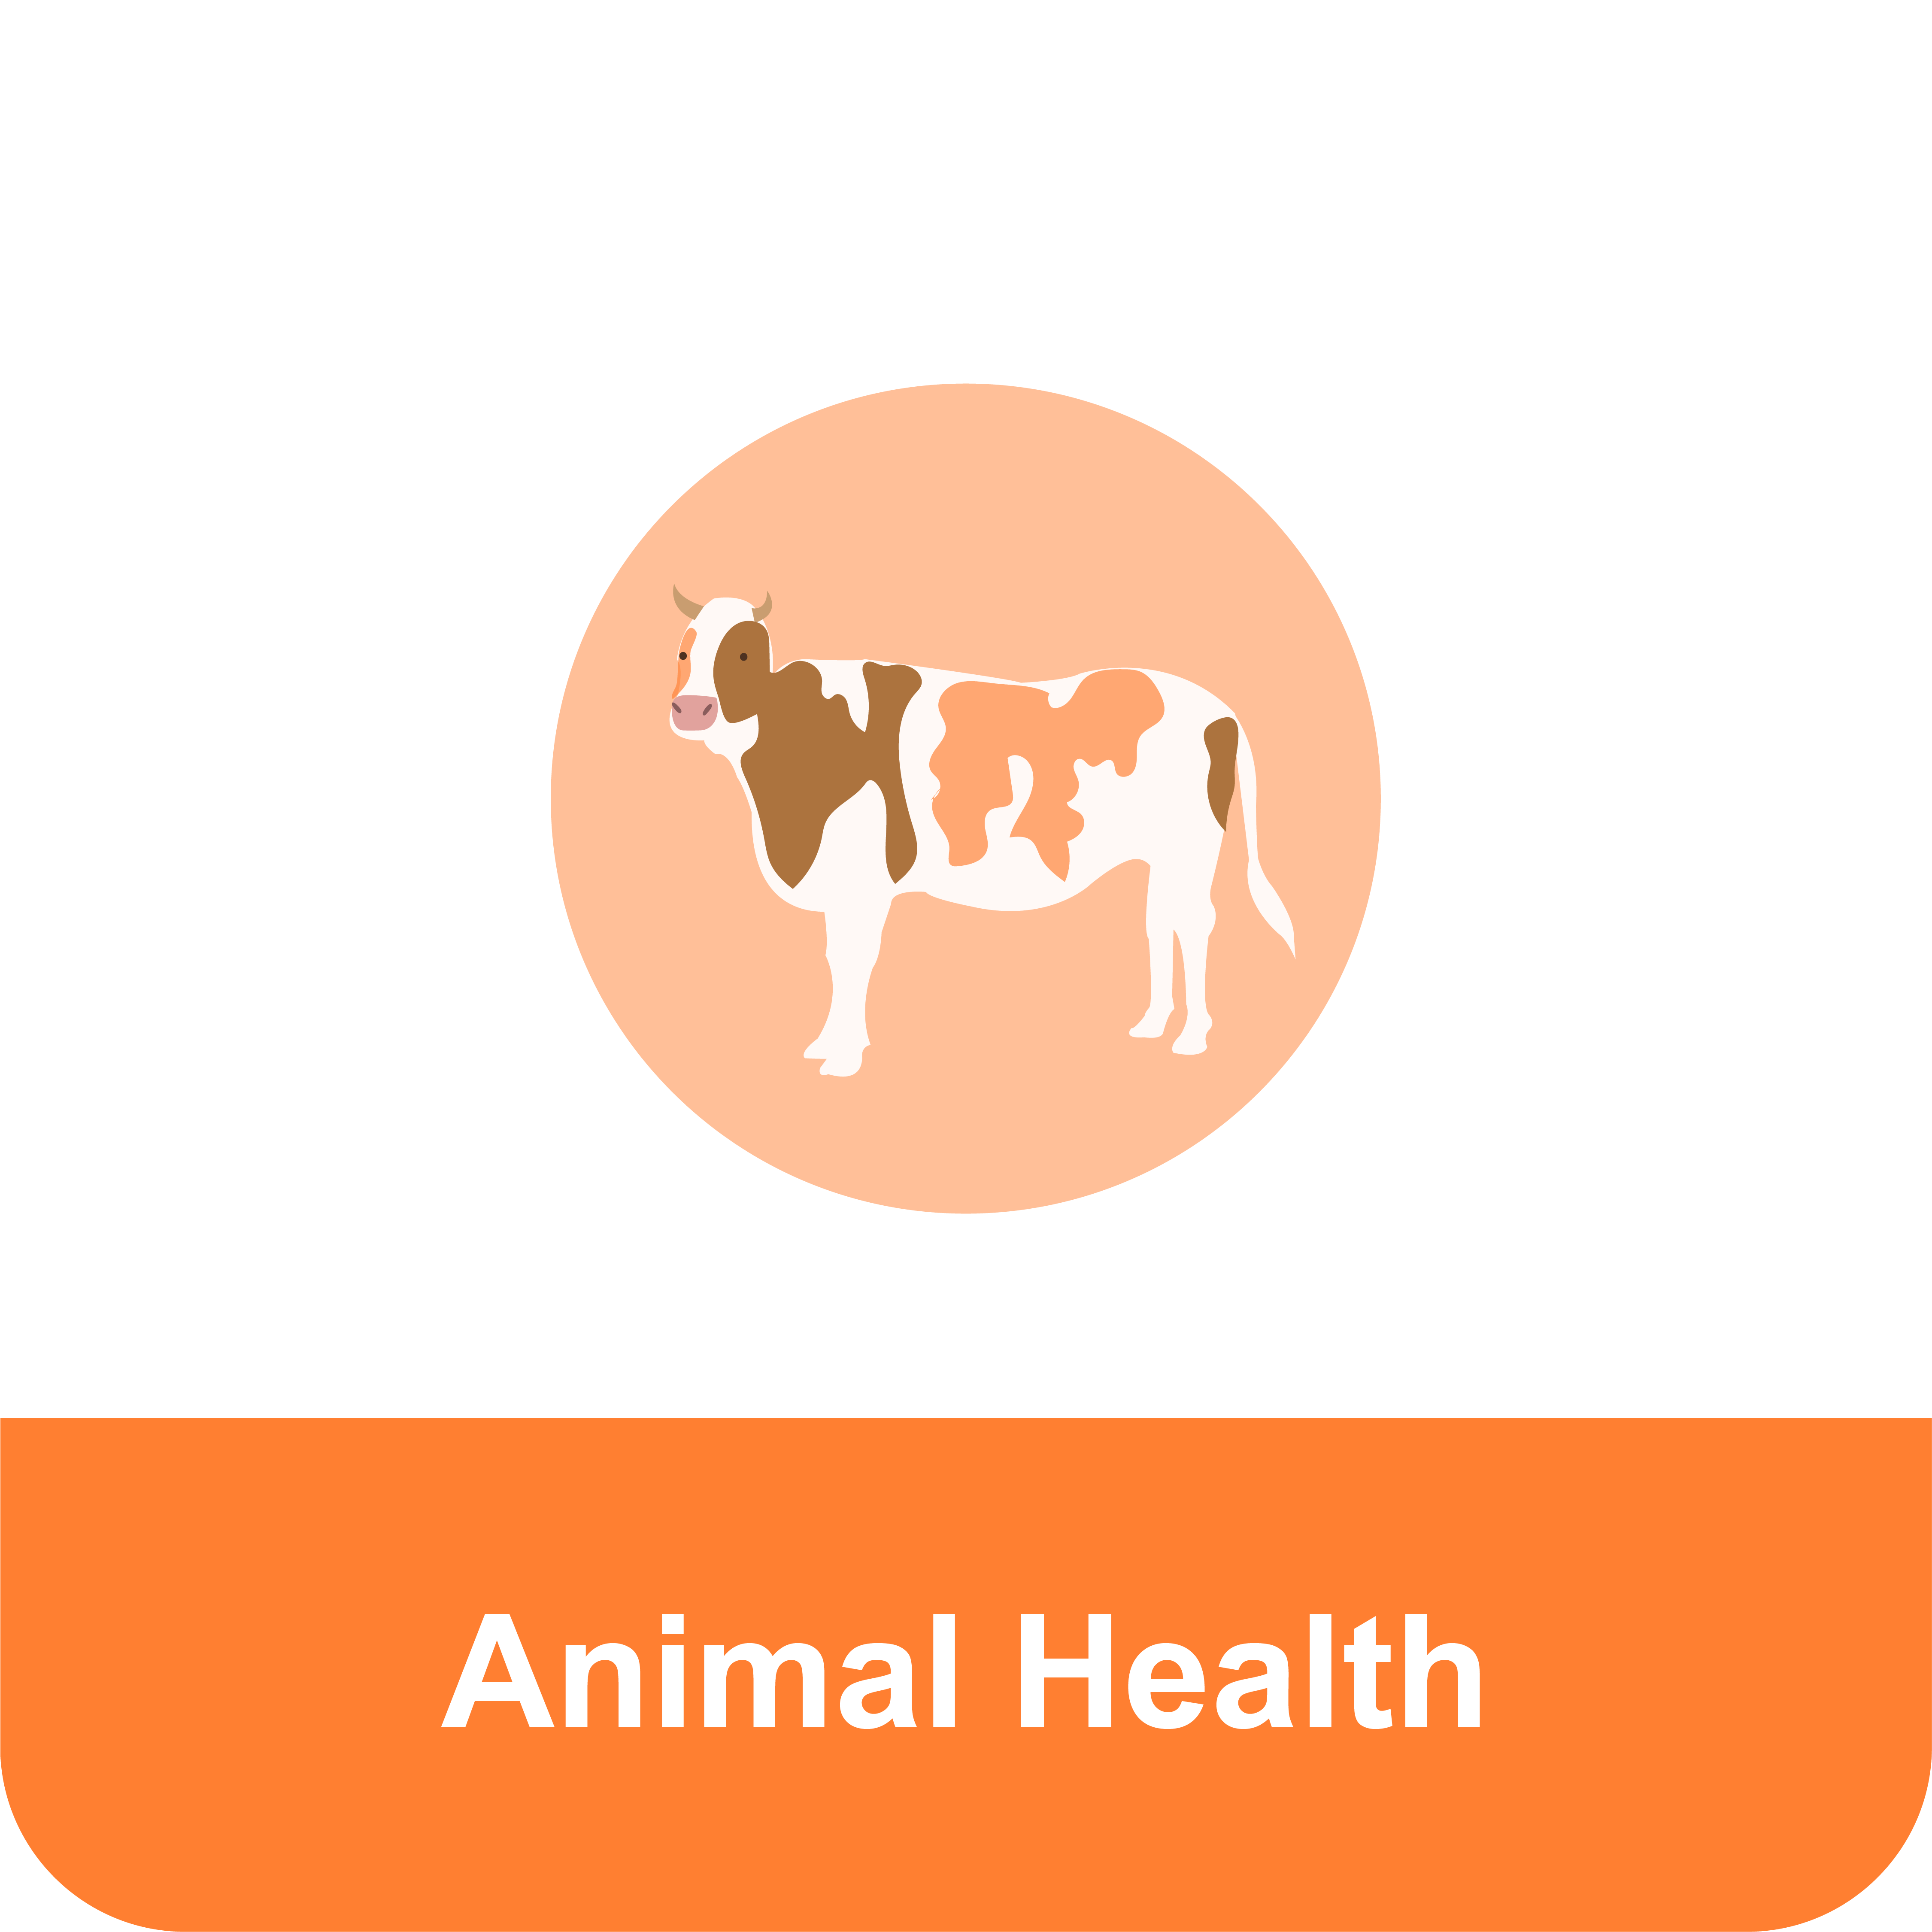 Title that reads "Animal Health" under an icon of a dairy cow.